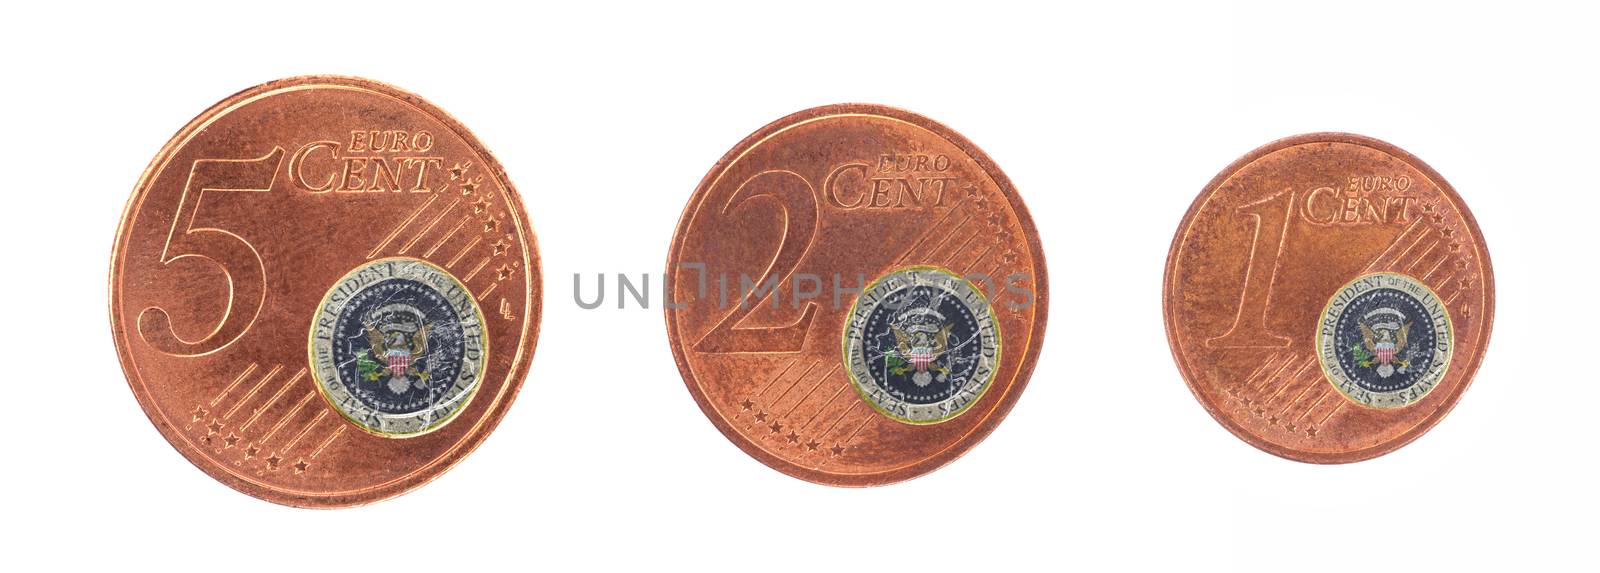 European union concept - 1, 2 and 5 eurocent by michaklootwijk